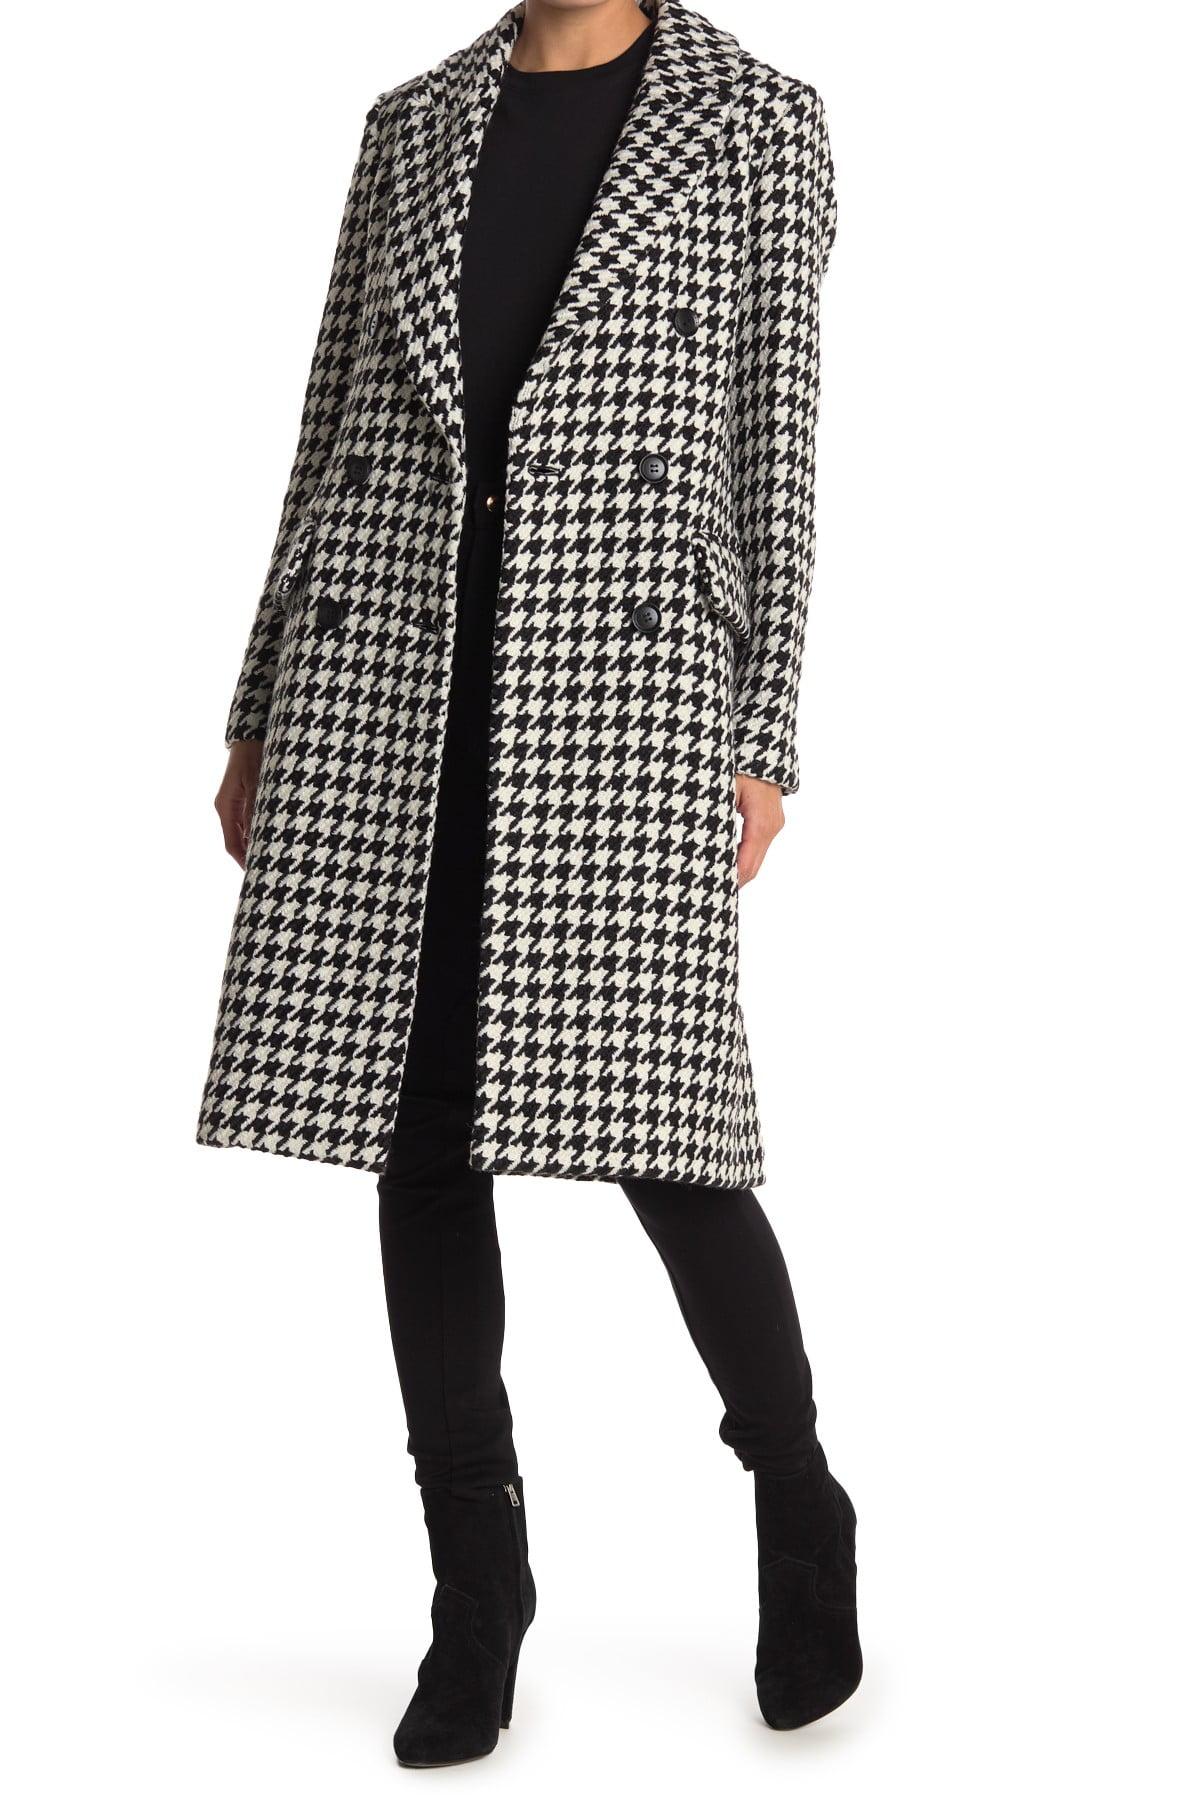 BCBGMAXAZRIA Houndstooth Double Breasted Wool Blend Coat in Black | Lyst